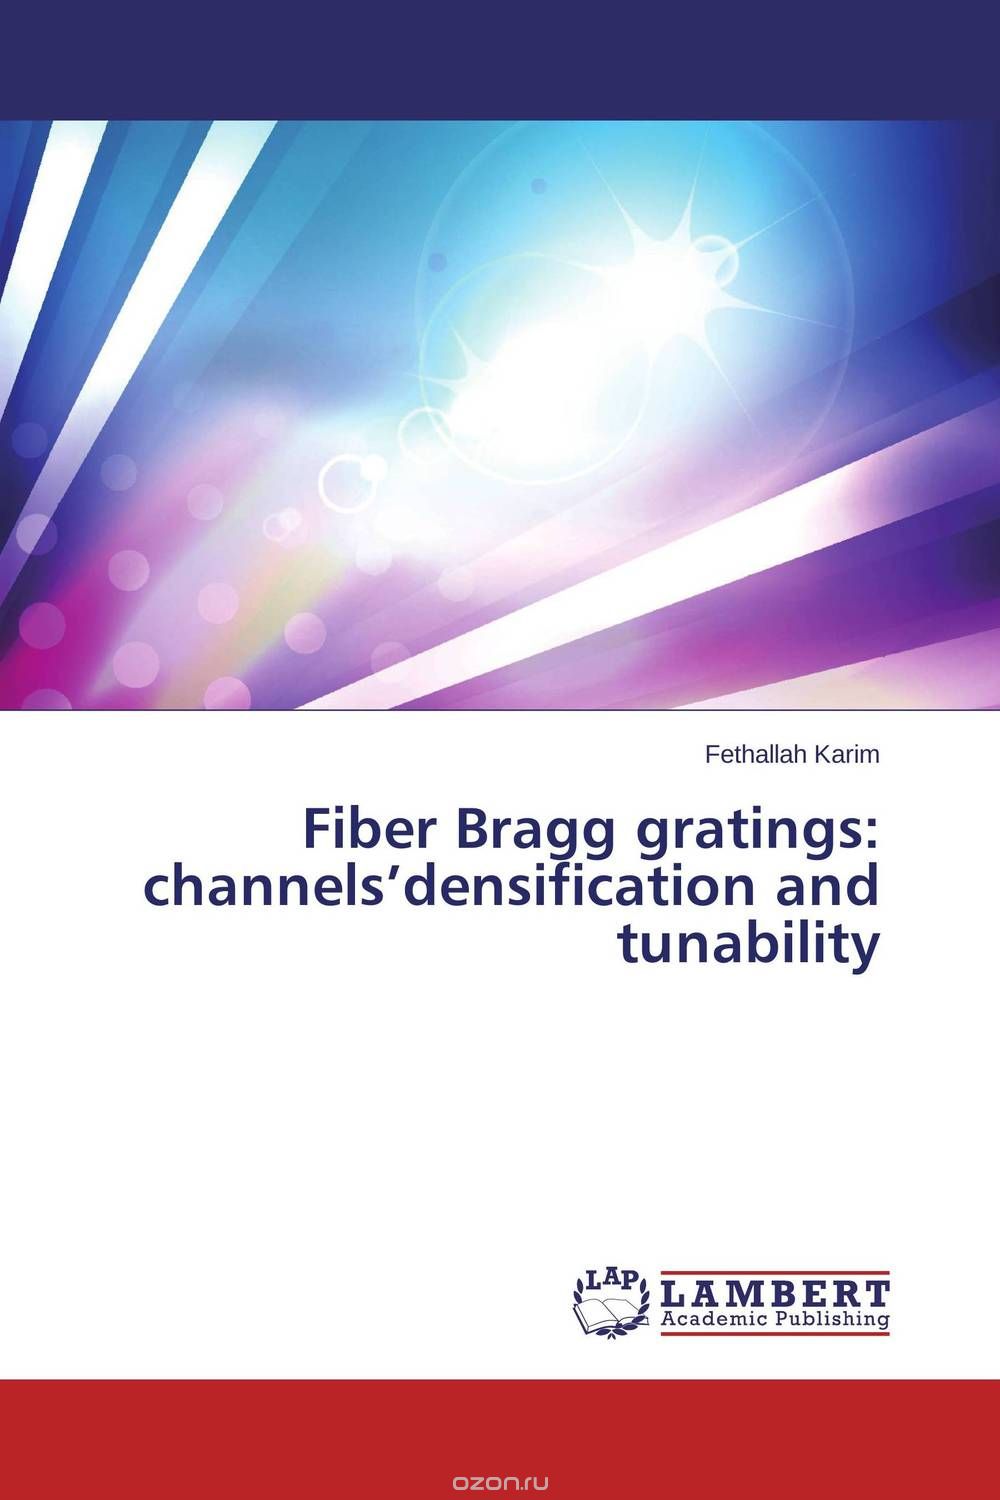 Fiber Bragg gratings: channels’densification and tunability